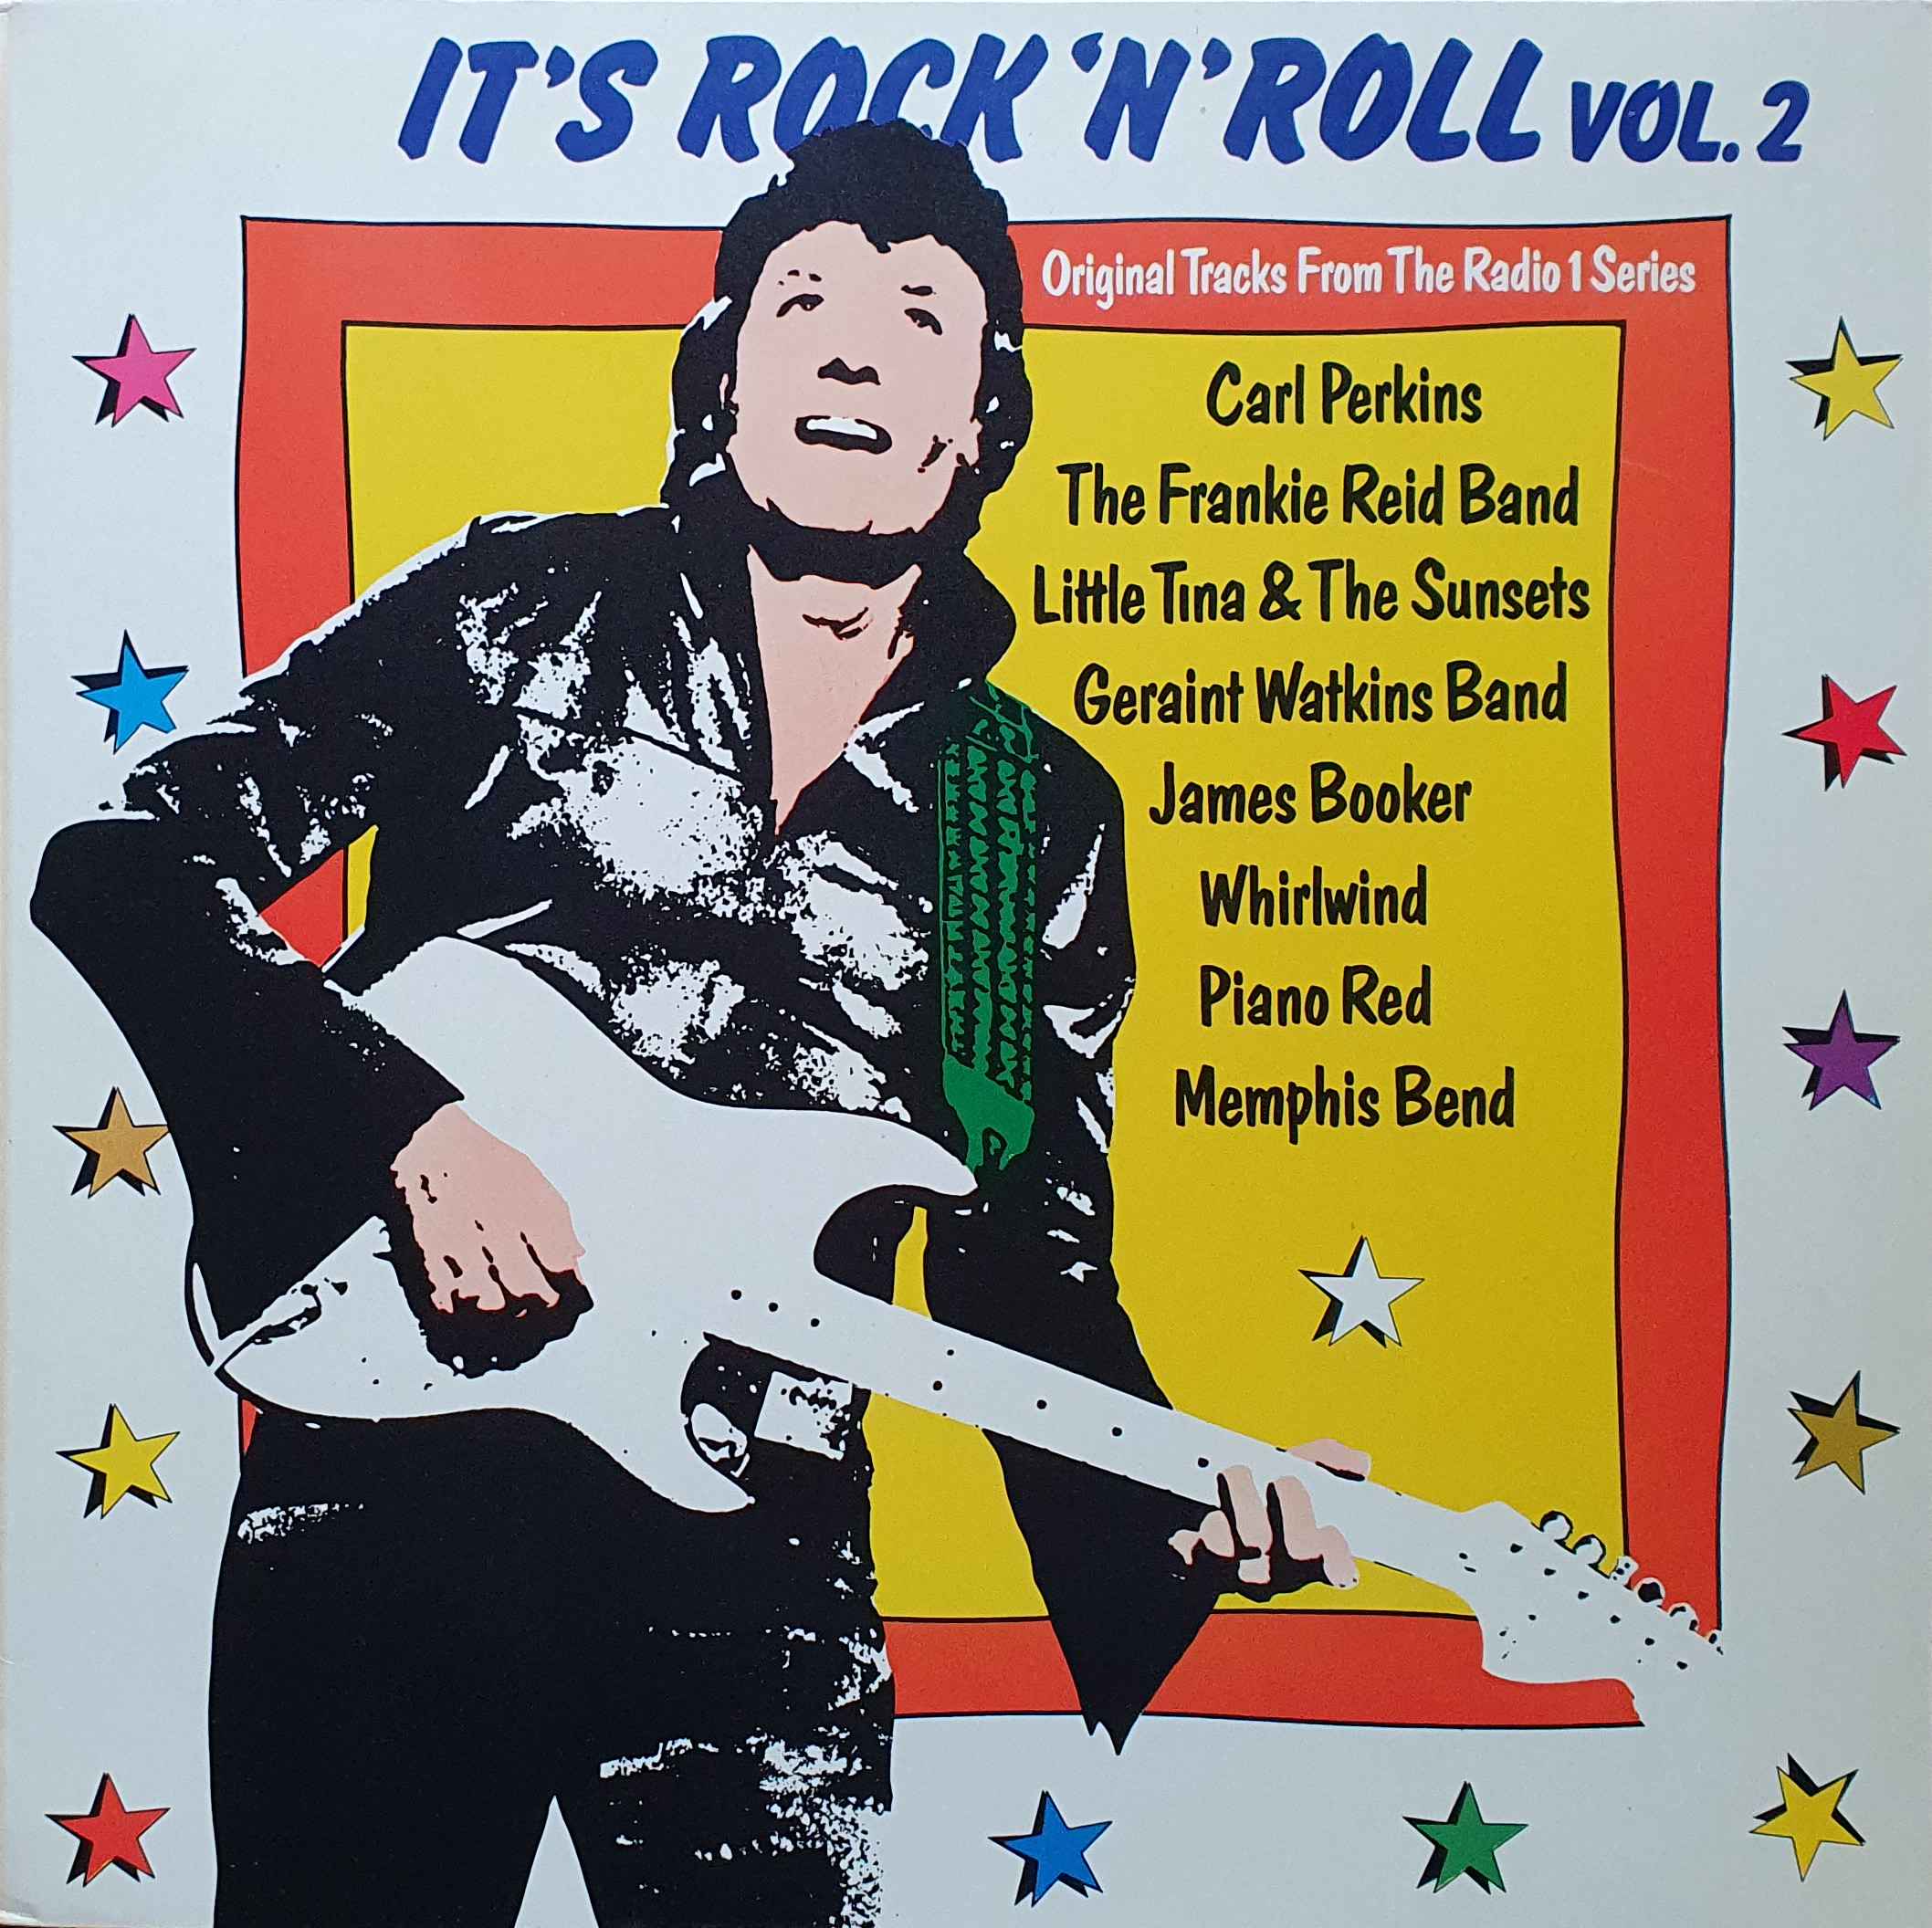 Picture of INT 128.005 It's rock 'N' roll - Volume 2 (German import) by artist Various from the BBC albums - Records and Tapes library